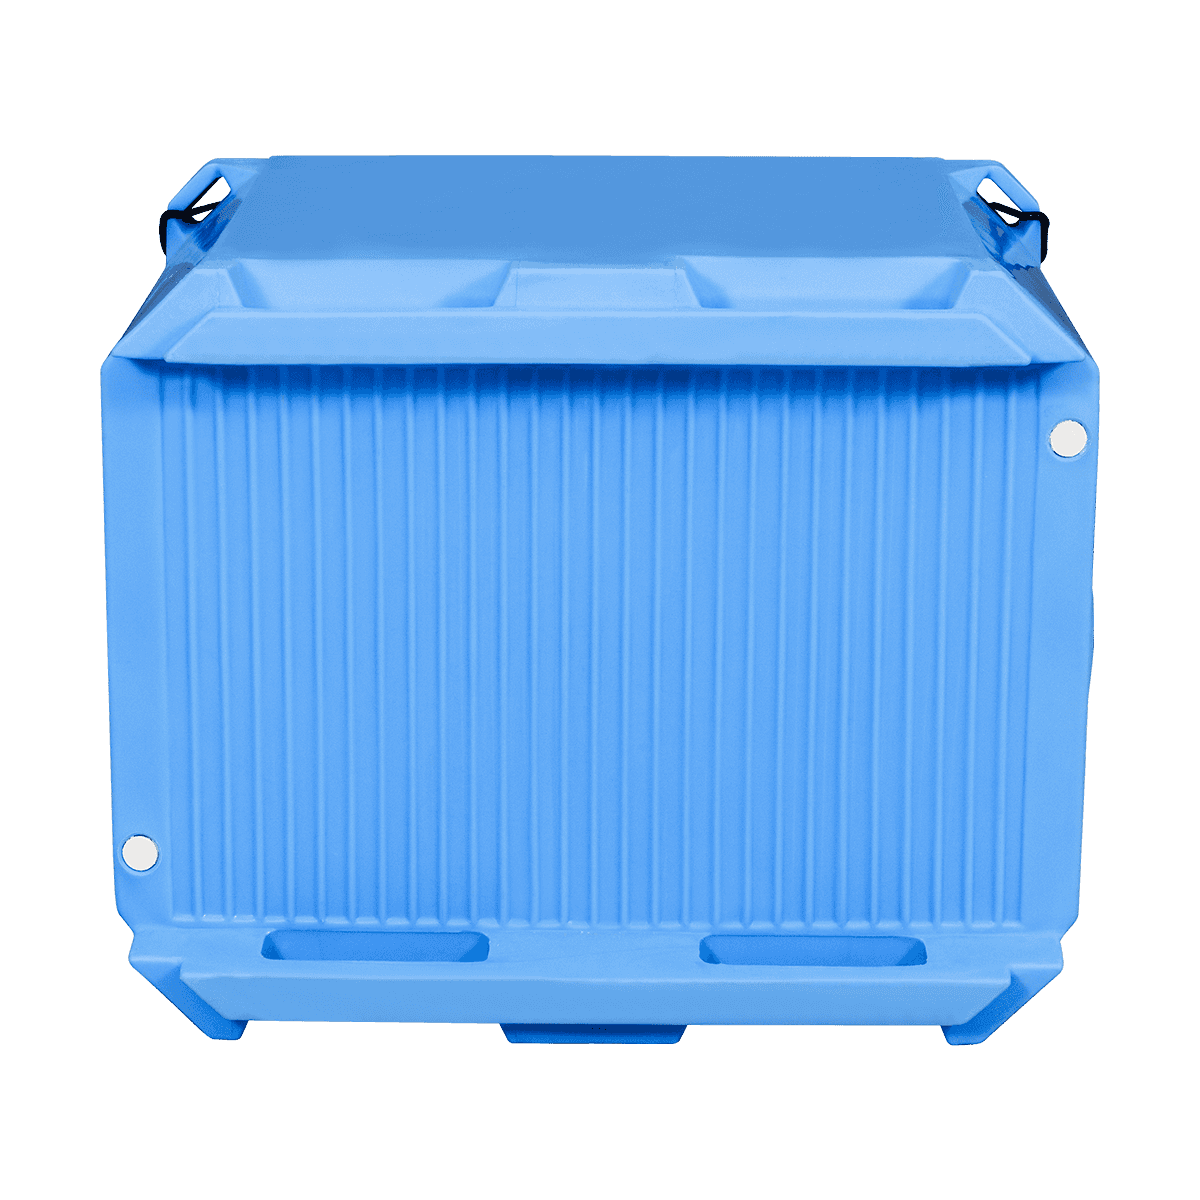 AF-380L Insulated Fish Tubs Seafood Industrial Use Plastic Containers